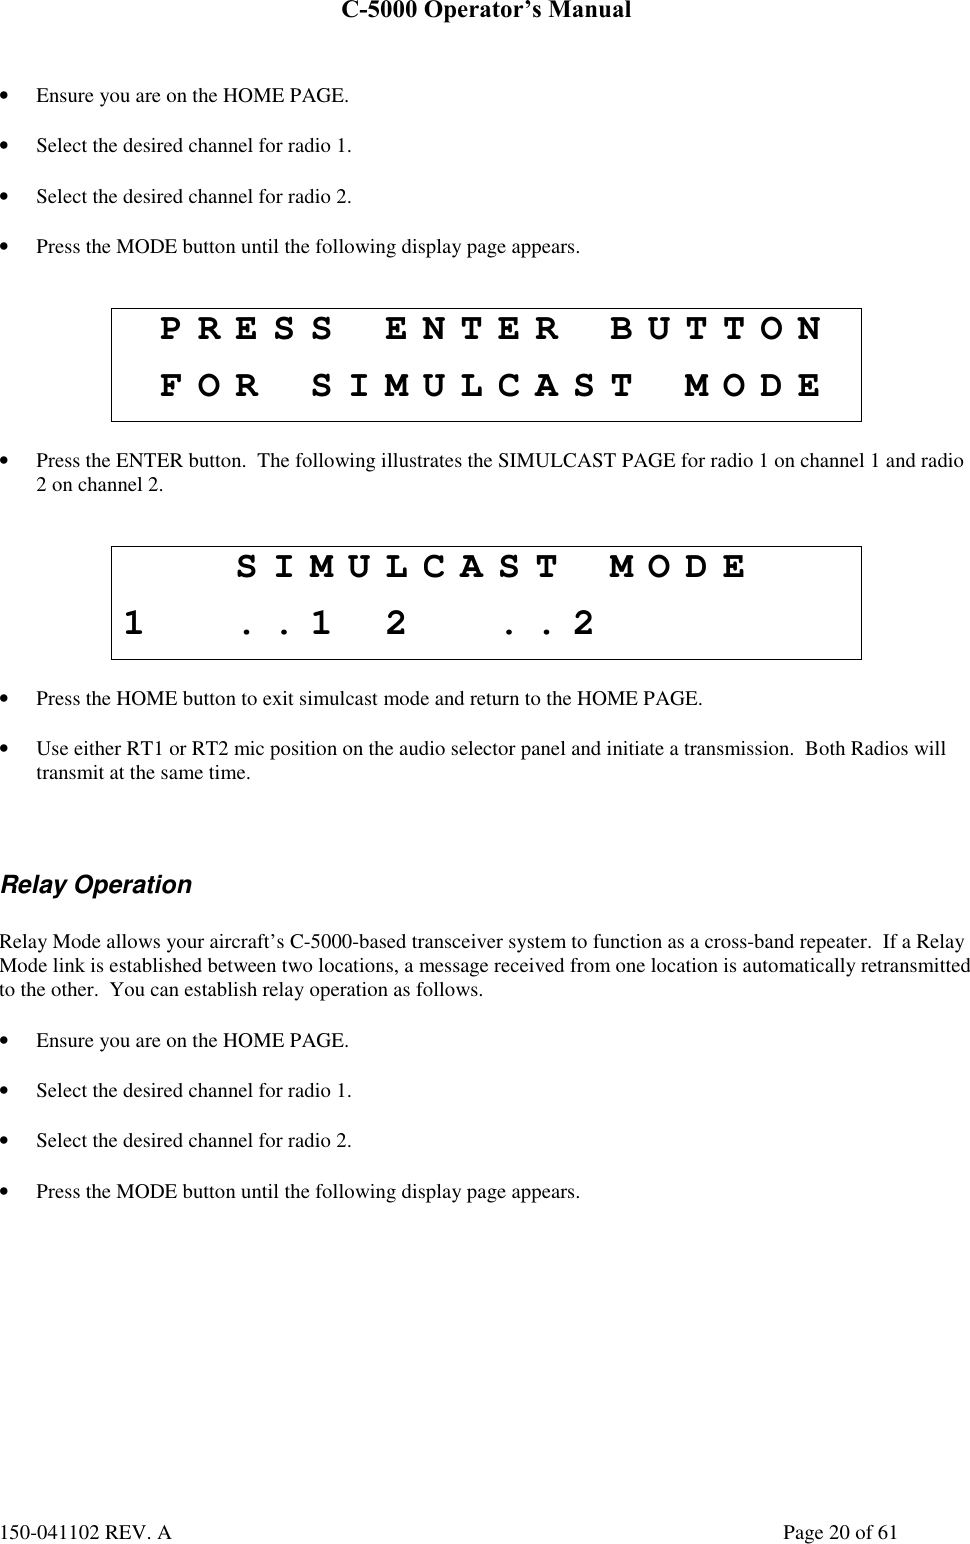 C-5000 Operator’s Manual150-041102 REV. A Page 20 of 61• Ensure you are on the HOME PAGE.• Select the desired channel for radio 1.• Select the desired channel for radio 2.• Press the MODE button until the following display page appears.PRESS ENTER BUTTONFOR SIMULCAST MODE• Press the ENTER button.  The following illustrates the SIMULCAST PAGE for radio 1 on channel 1 and radio2 on channel 2.SIMULCAST MODE1 ..1 2 ..2• Press the HOME button to exit simulcast mode and return to the HOME PAGE.• Use either RT1 or RT2 mic position on the audio selector panel and initiate a transmission.  Both Radios willtransmit at the same time.Relay OperationRelay Mode allows your aircraft’s C-5000-based transceiver system to function as a cross-band repeater.  If a RelayMode link is established between two locations, a message received from one location is automatically retransmittedto the other.  You can establish relay operation as follows.• Ensure you are on the HOME PAGE.• Select the desired channel for radio 1.• Select the desired channel for radio 2.• Press the MODE button until the following display page appears.